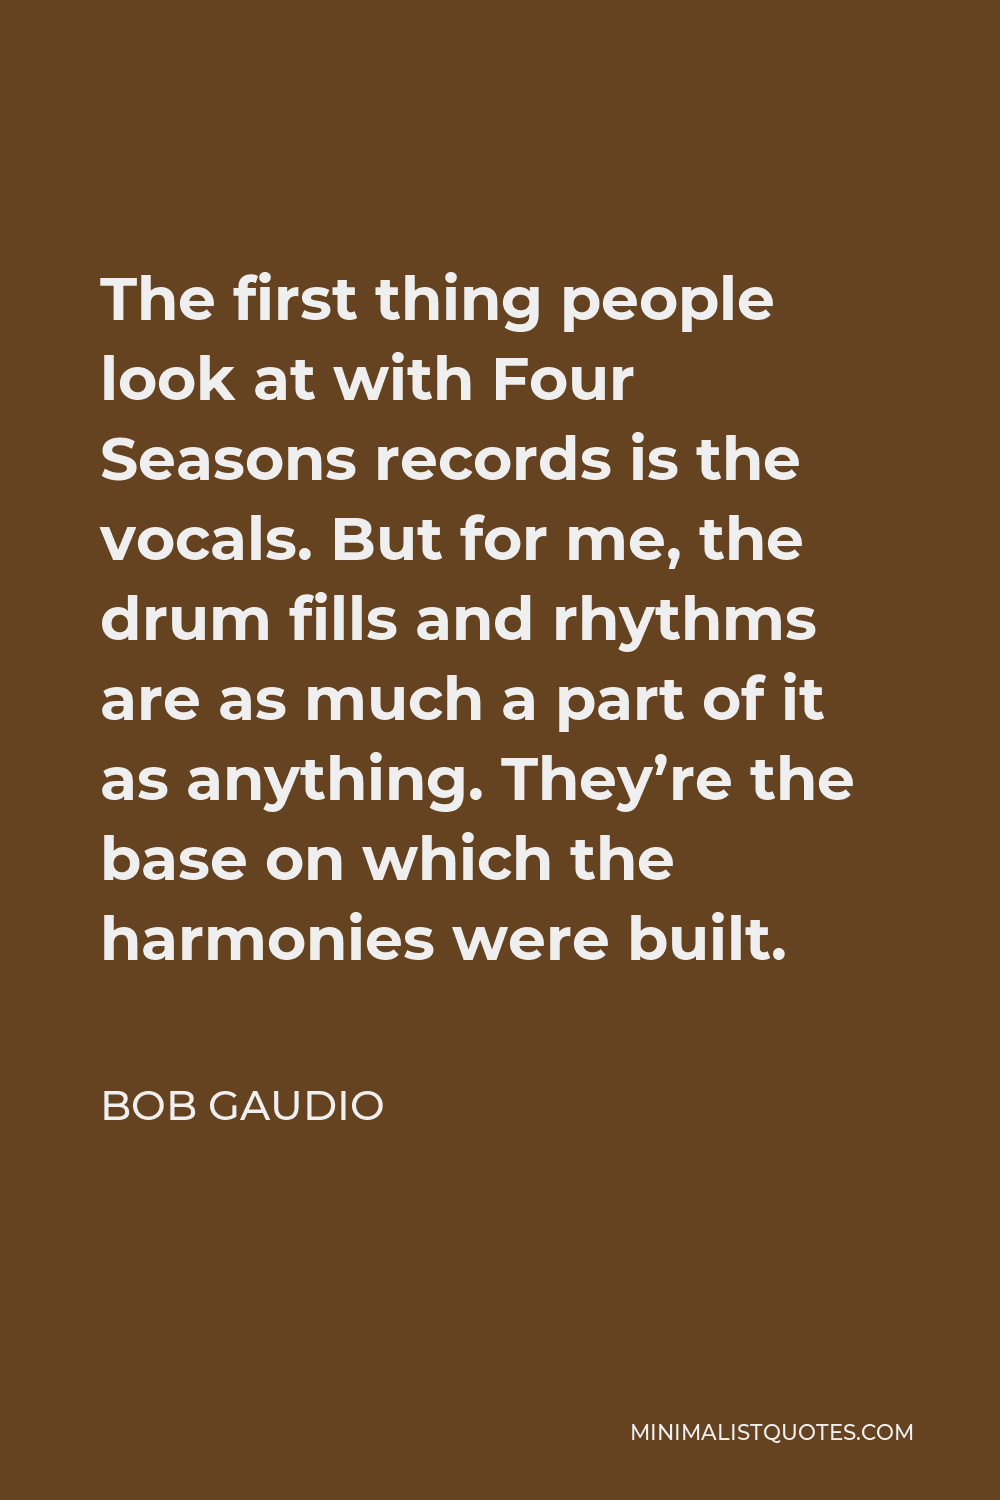 Bob Gaudio Quote - The first thing people look at with Four Seasons records is the vocals. But for me, the drum fills and rhythms are as much a part of it as anything. They’re the base on which the harmonies were built.